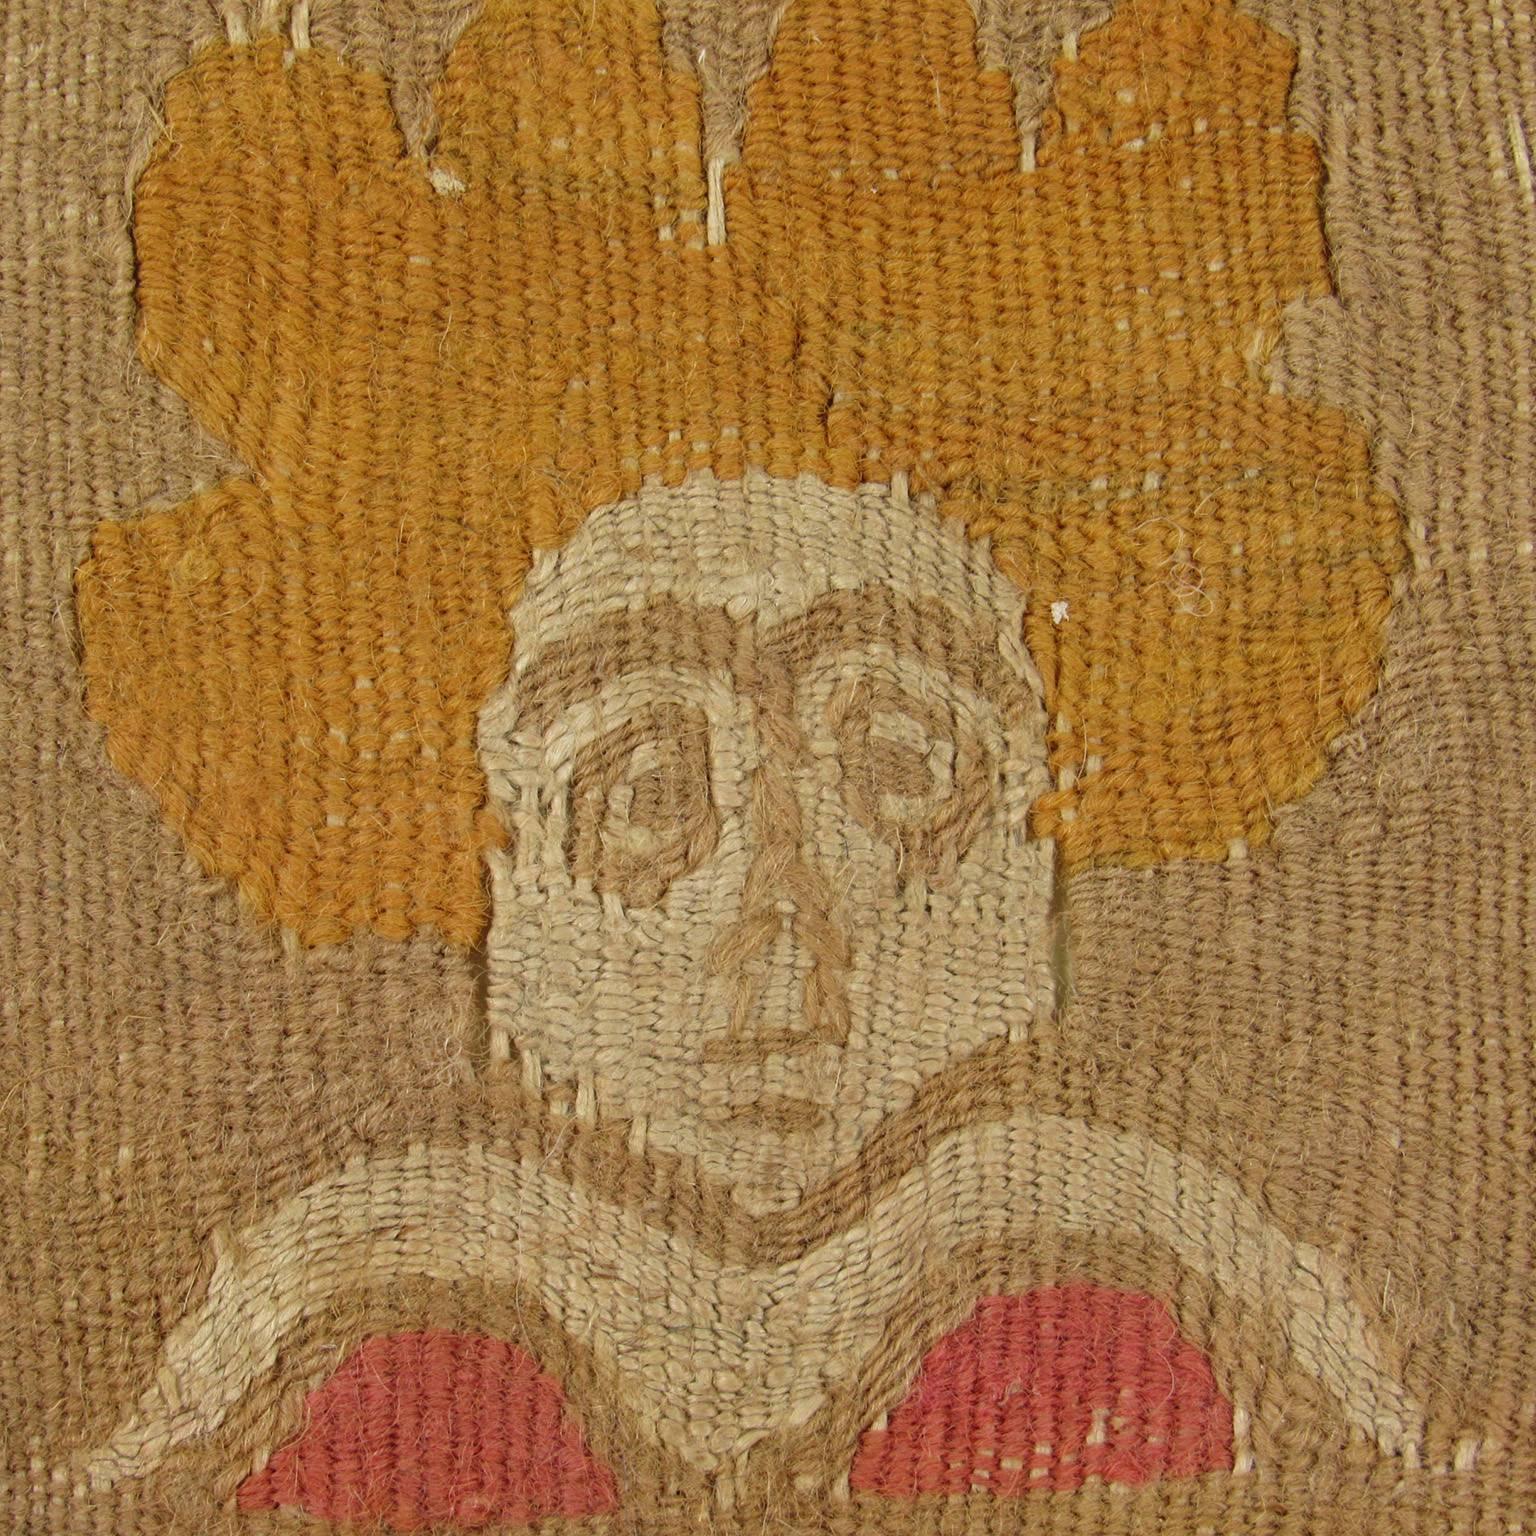 Ancient Coptic Portrait Textile Fragment, Egypt, possibly 3-4 century. Unusually whimsical design!! Wool and linen tapestry fragment depicting the head of a woman with blonde hair and large eyes, surrounded by a blue border with geometric